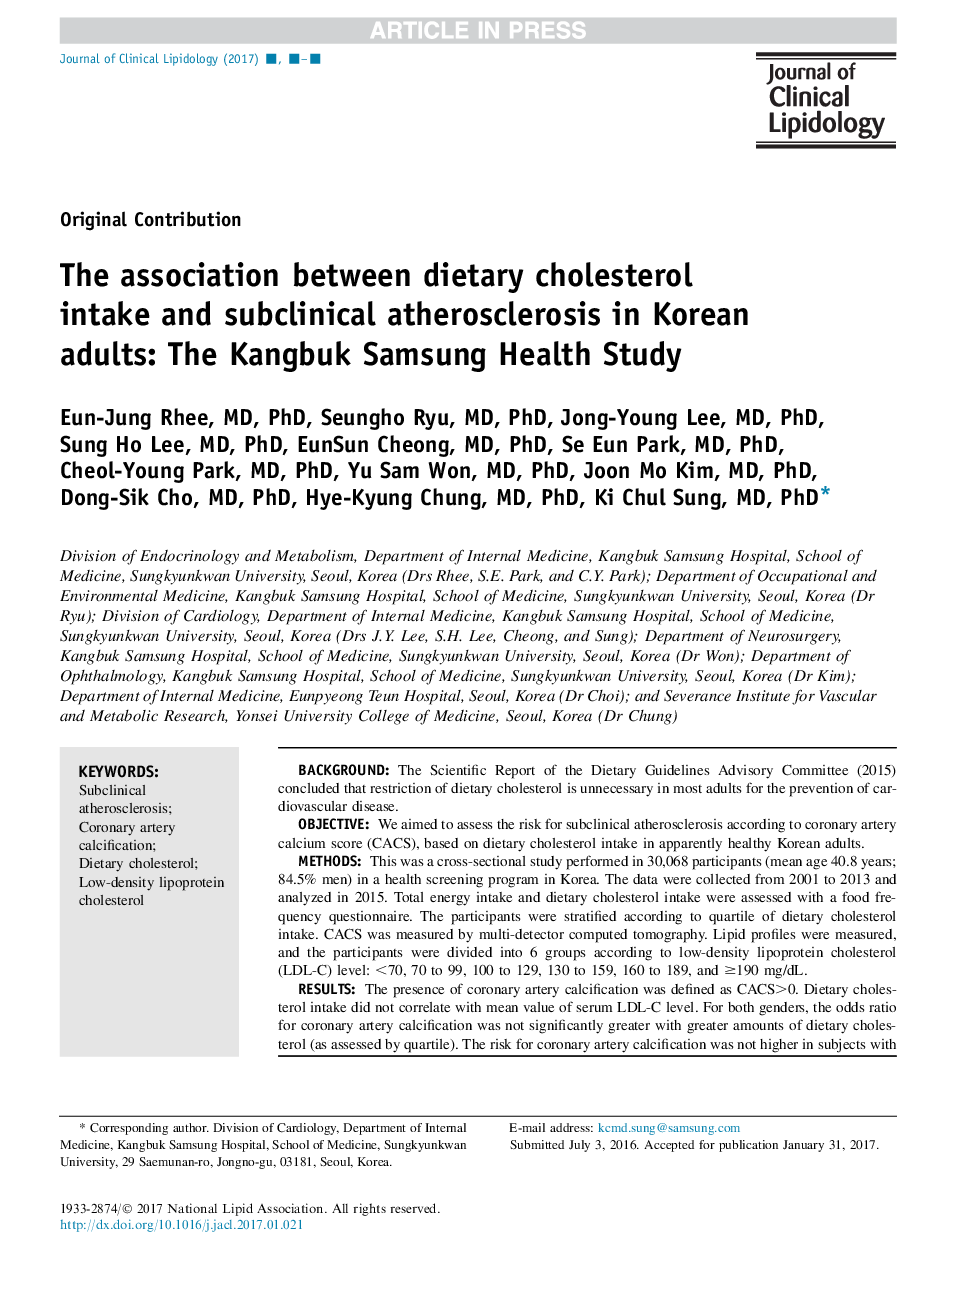 The association between dietary cholesterol intake and subclinical atherosclerosis in Korean adults: The Kangbuk Samsung Health Study